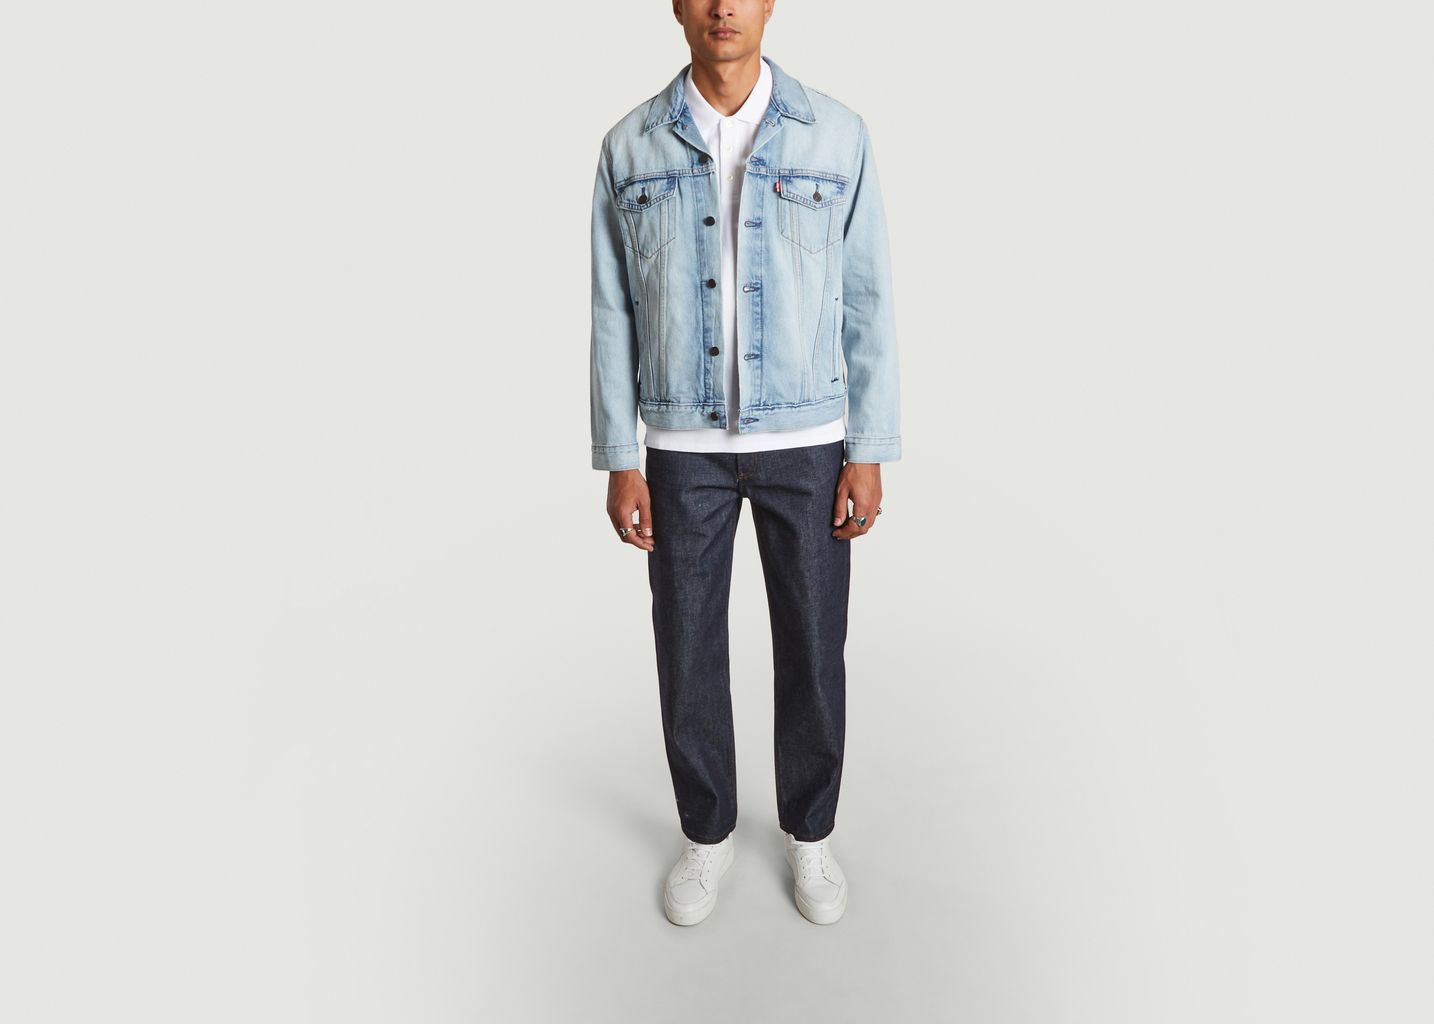 Washed denim jacket with straight cut Denim Levi's Red Tab | L'Exception